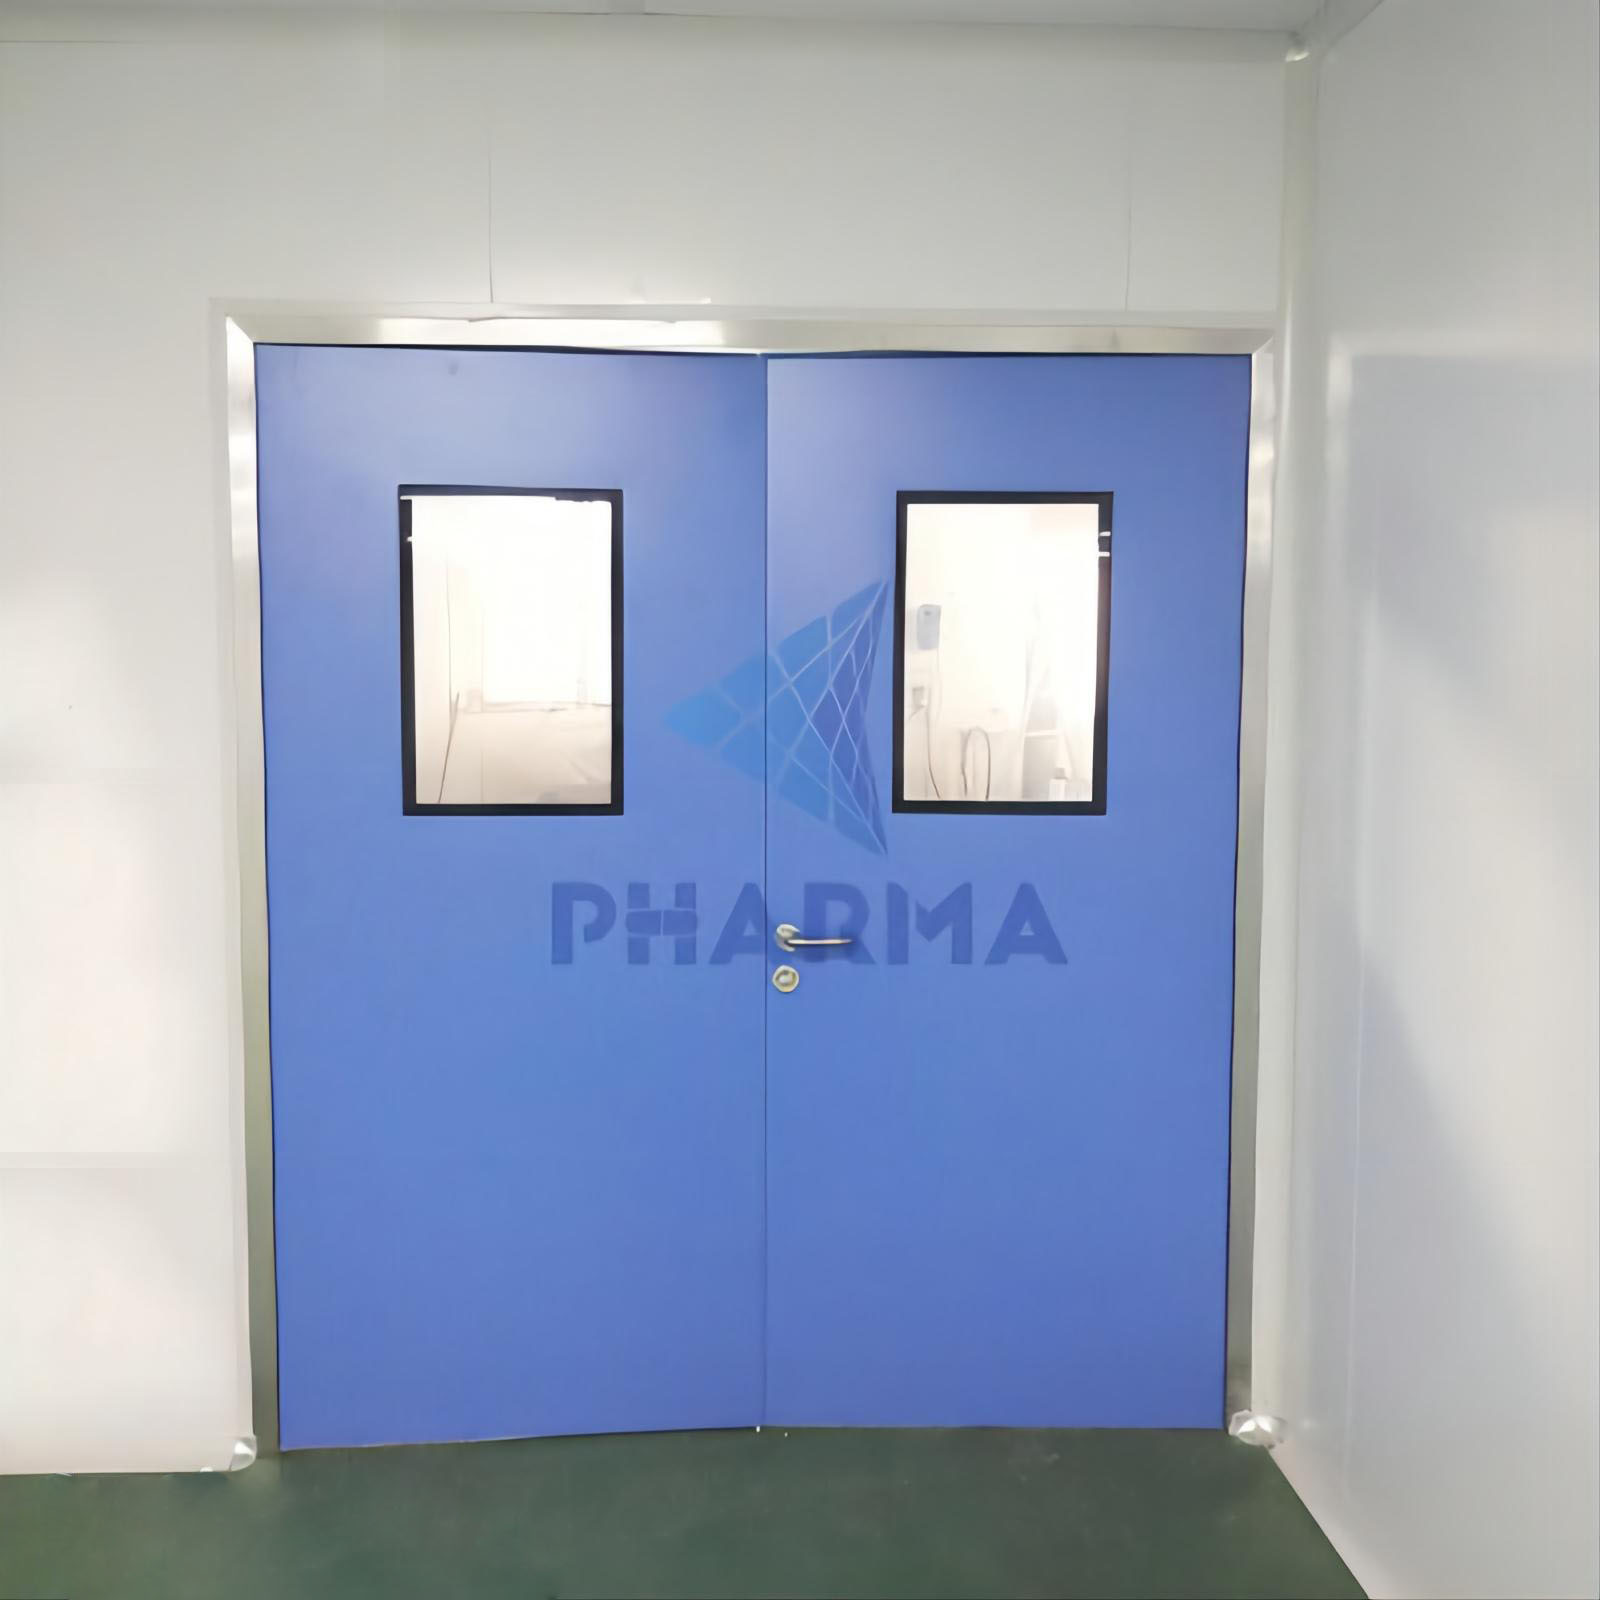 news-The Importance Of Choosing The Right Clean Door-PHARMA-img-1